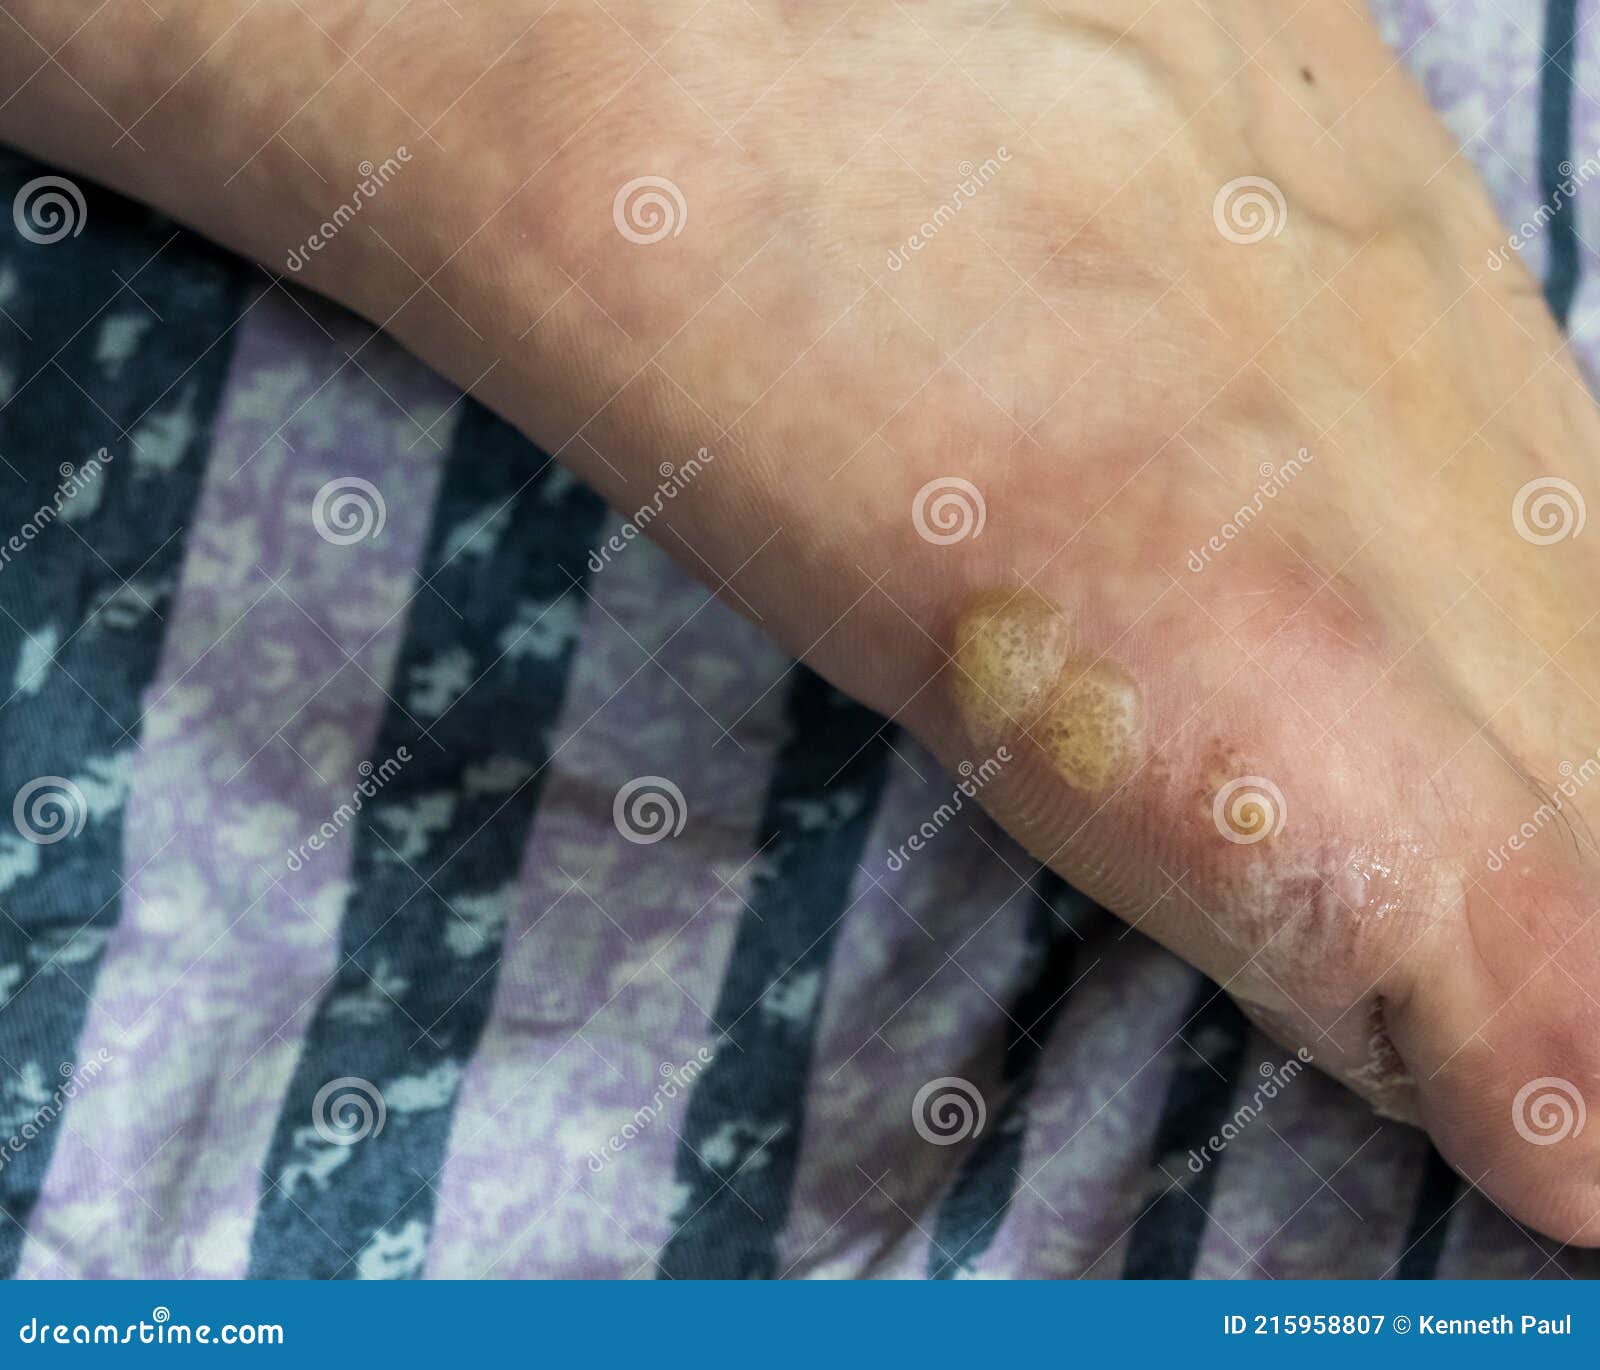 Multiple Blisters On Foot Stock Image Image Of Foot 215958807